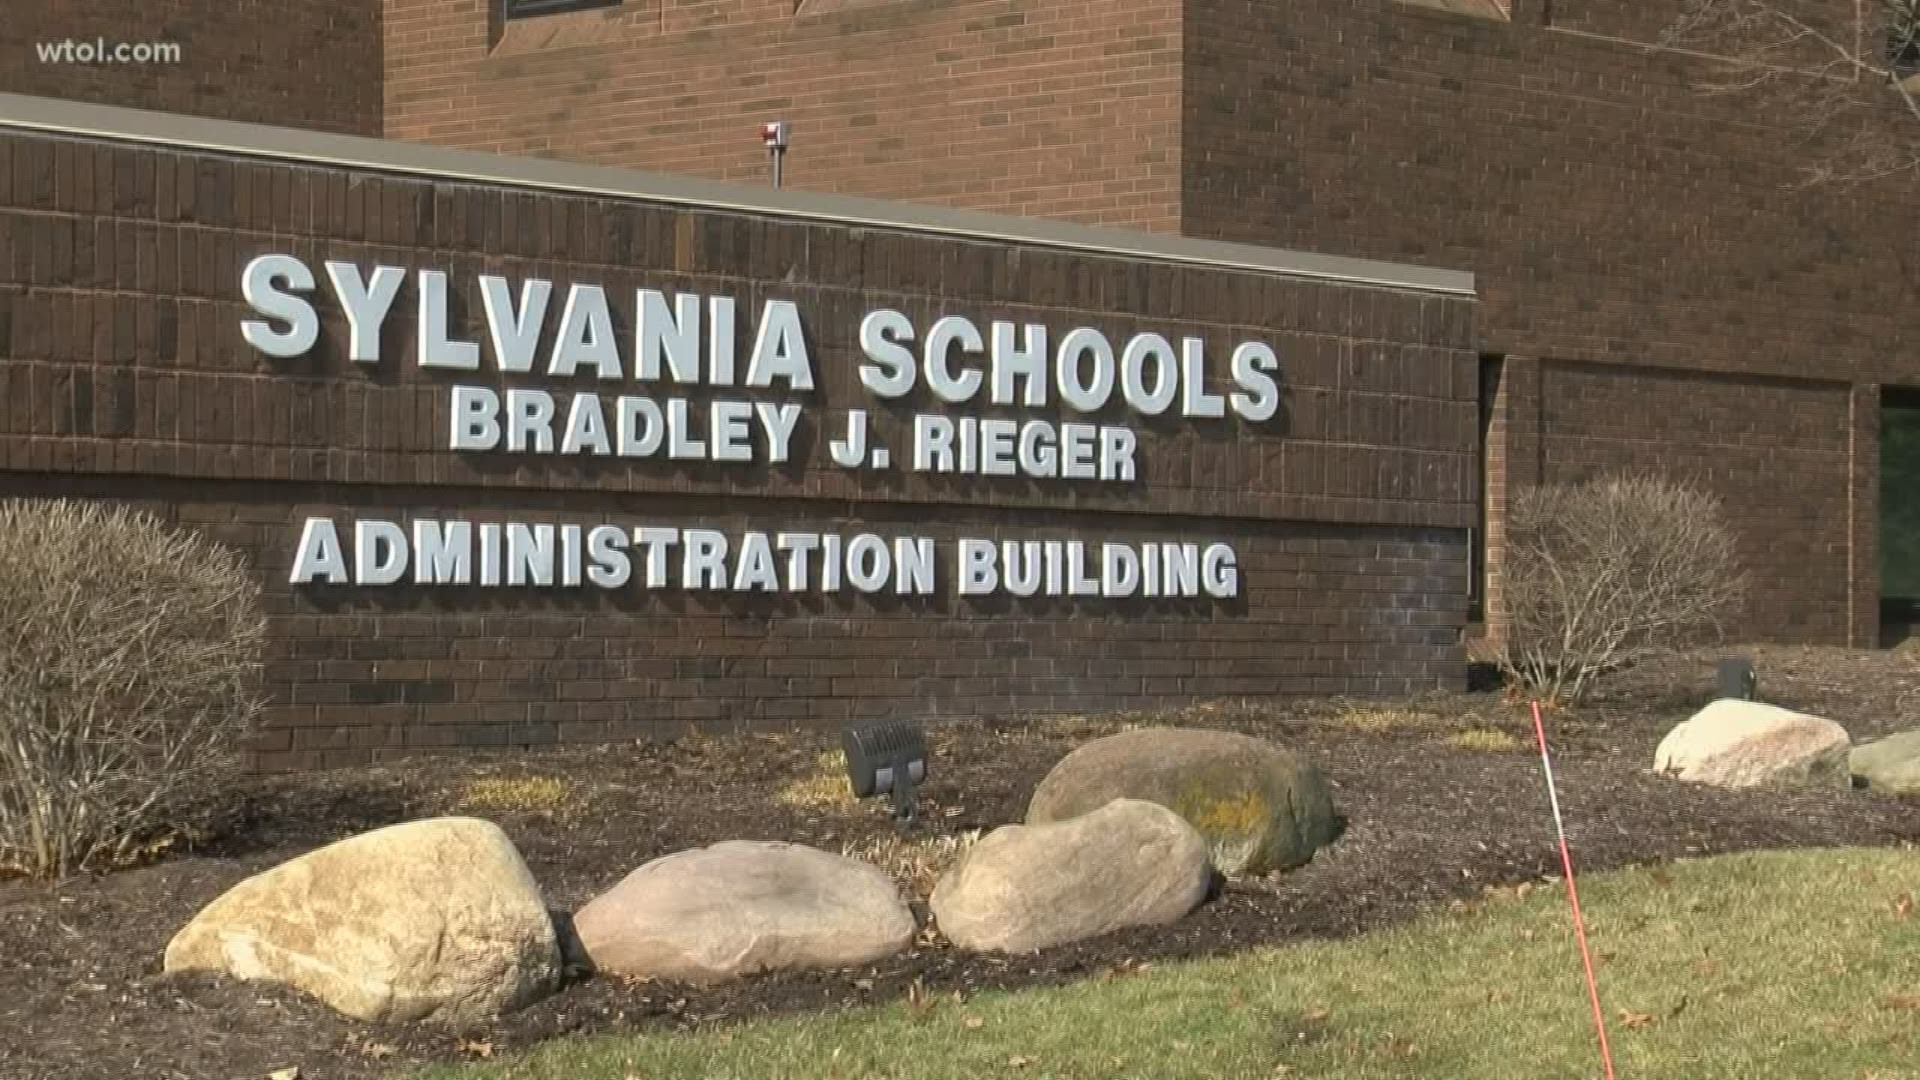 School is back in session in Sylvania. Last year, the district decided to change some bus routes which lead to both confusion and frustration.